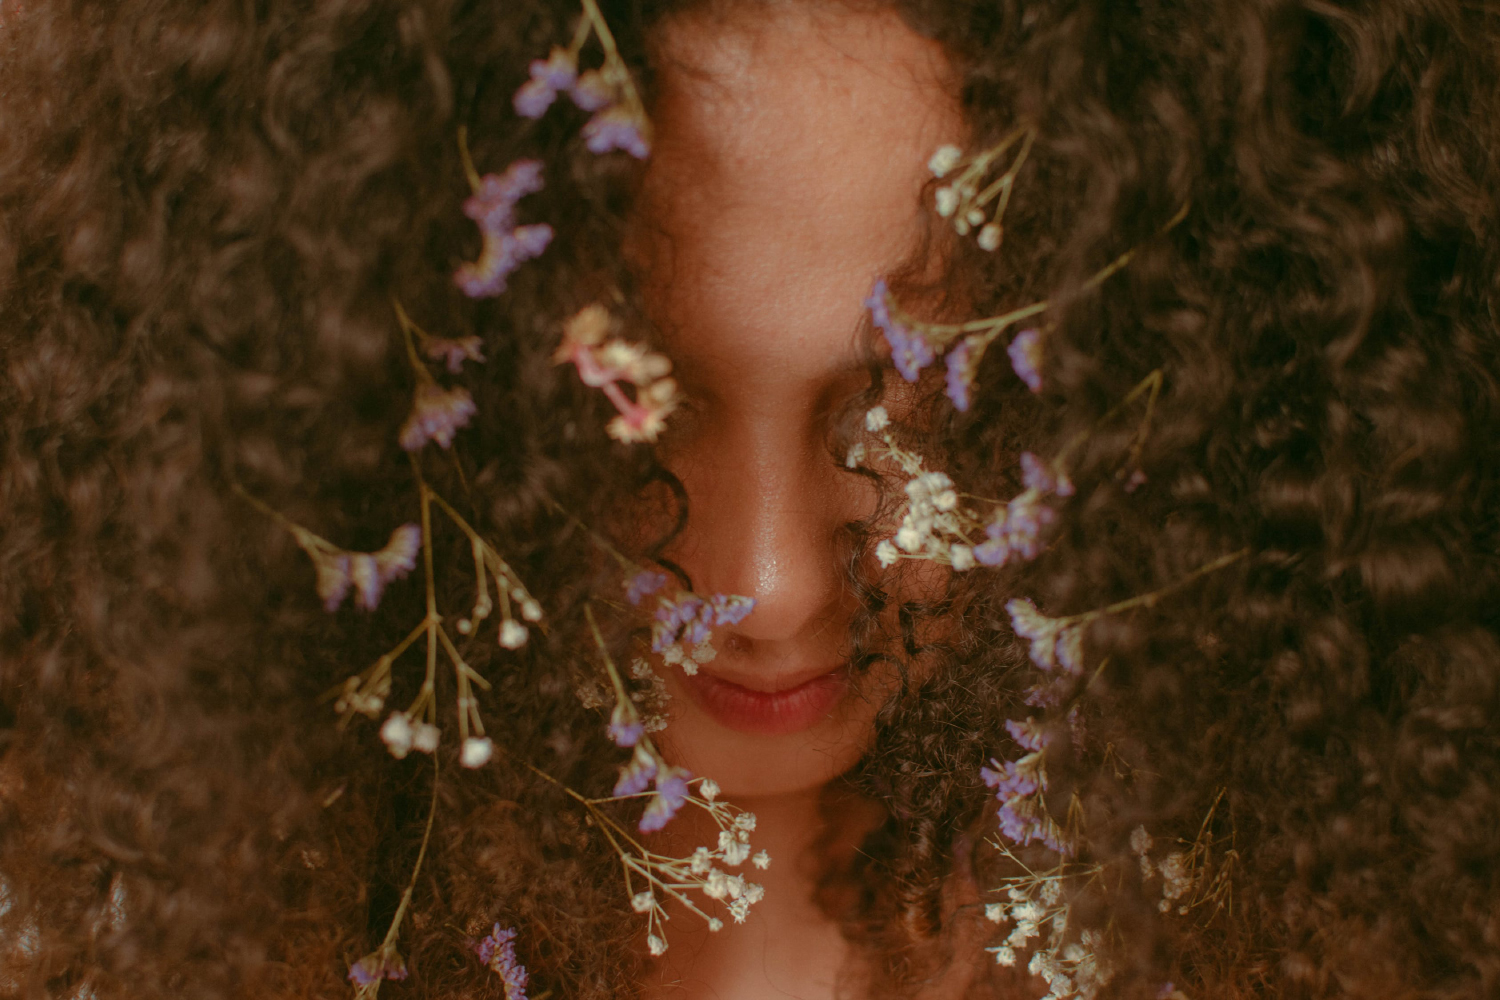 a close-up of curly hair with flowers in it